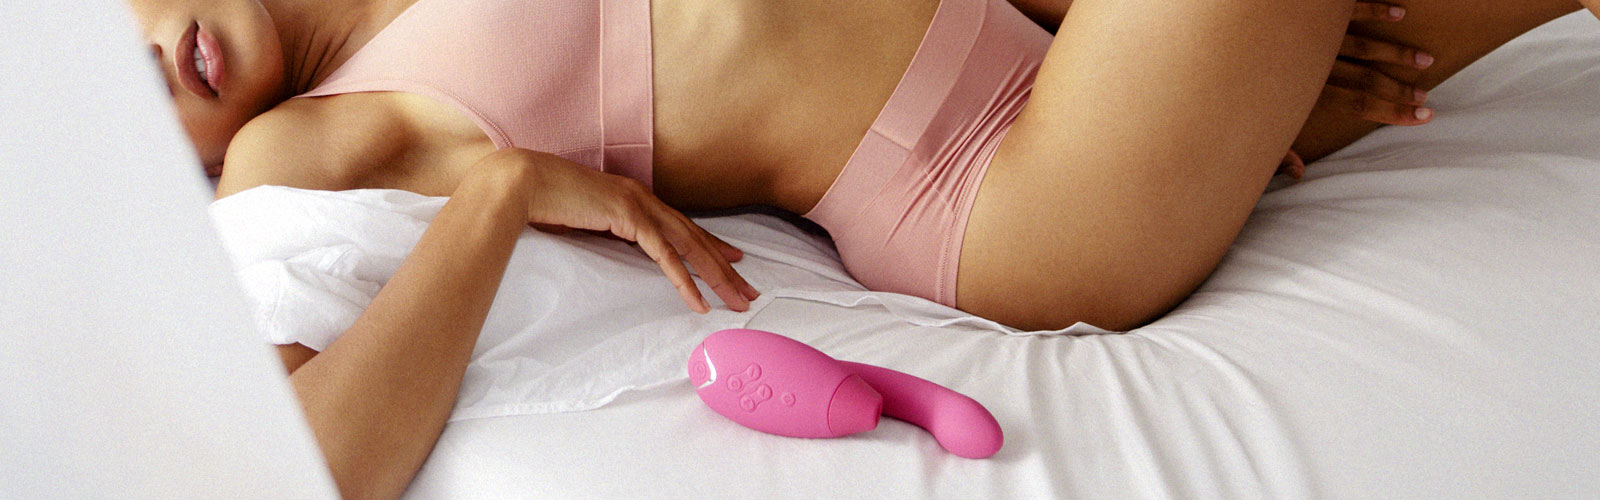 Woman on bed with vibrator